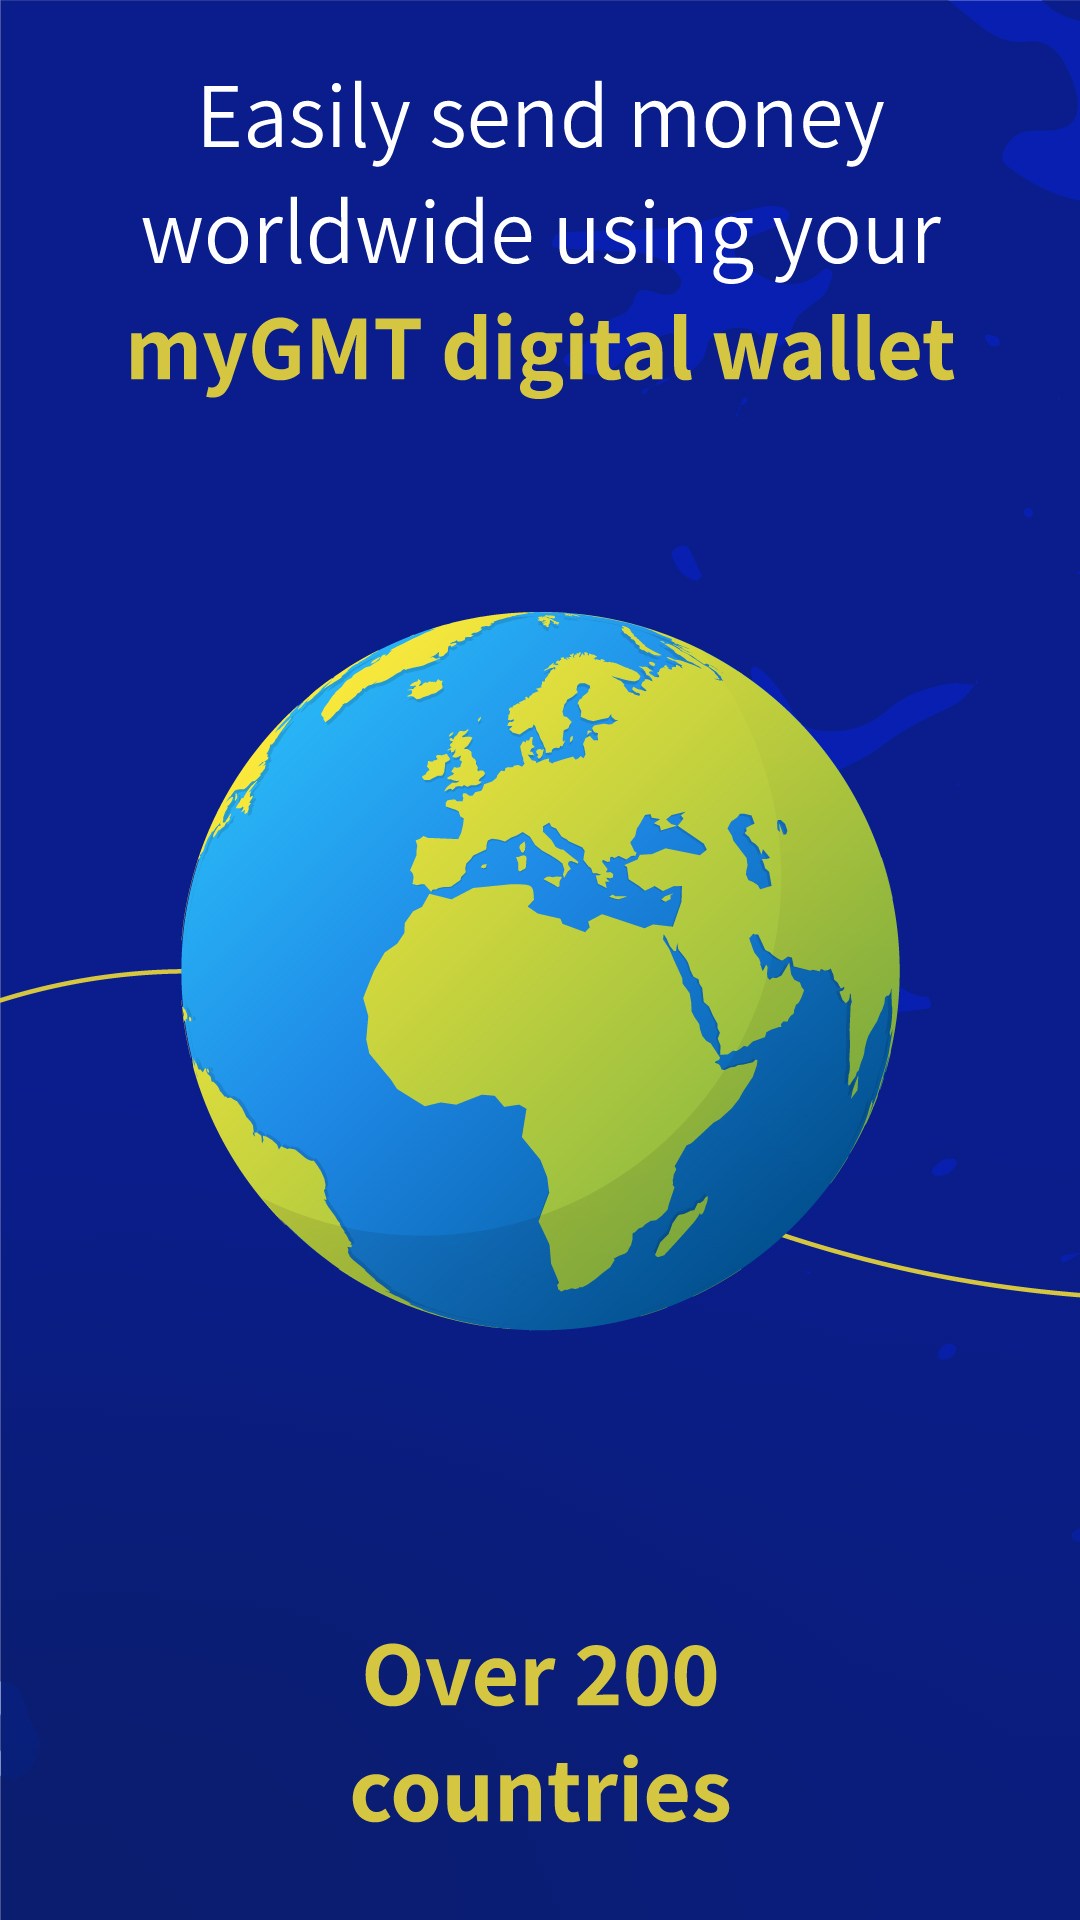 Global Reach: Connect with friends and family worldwide. MyGMT facilitates transfers to numerous countries, making it your go-to platform for international money transactions.